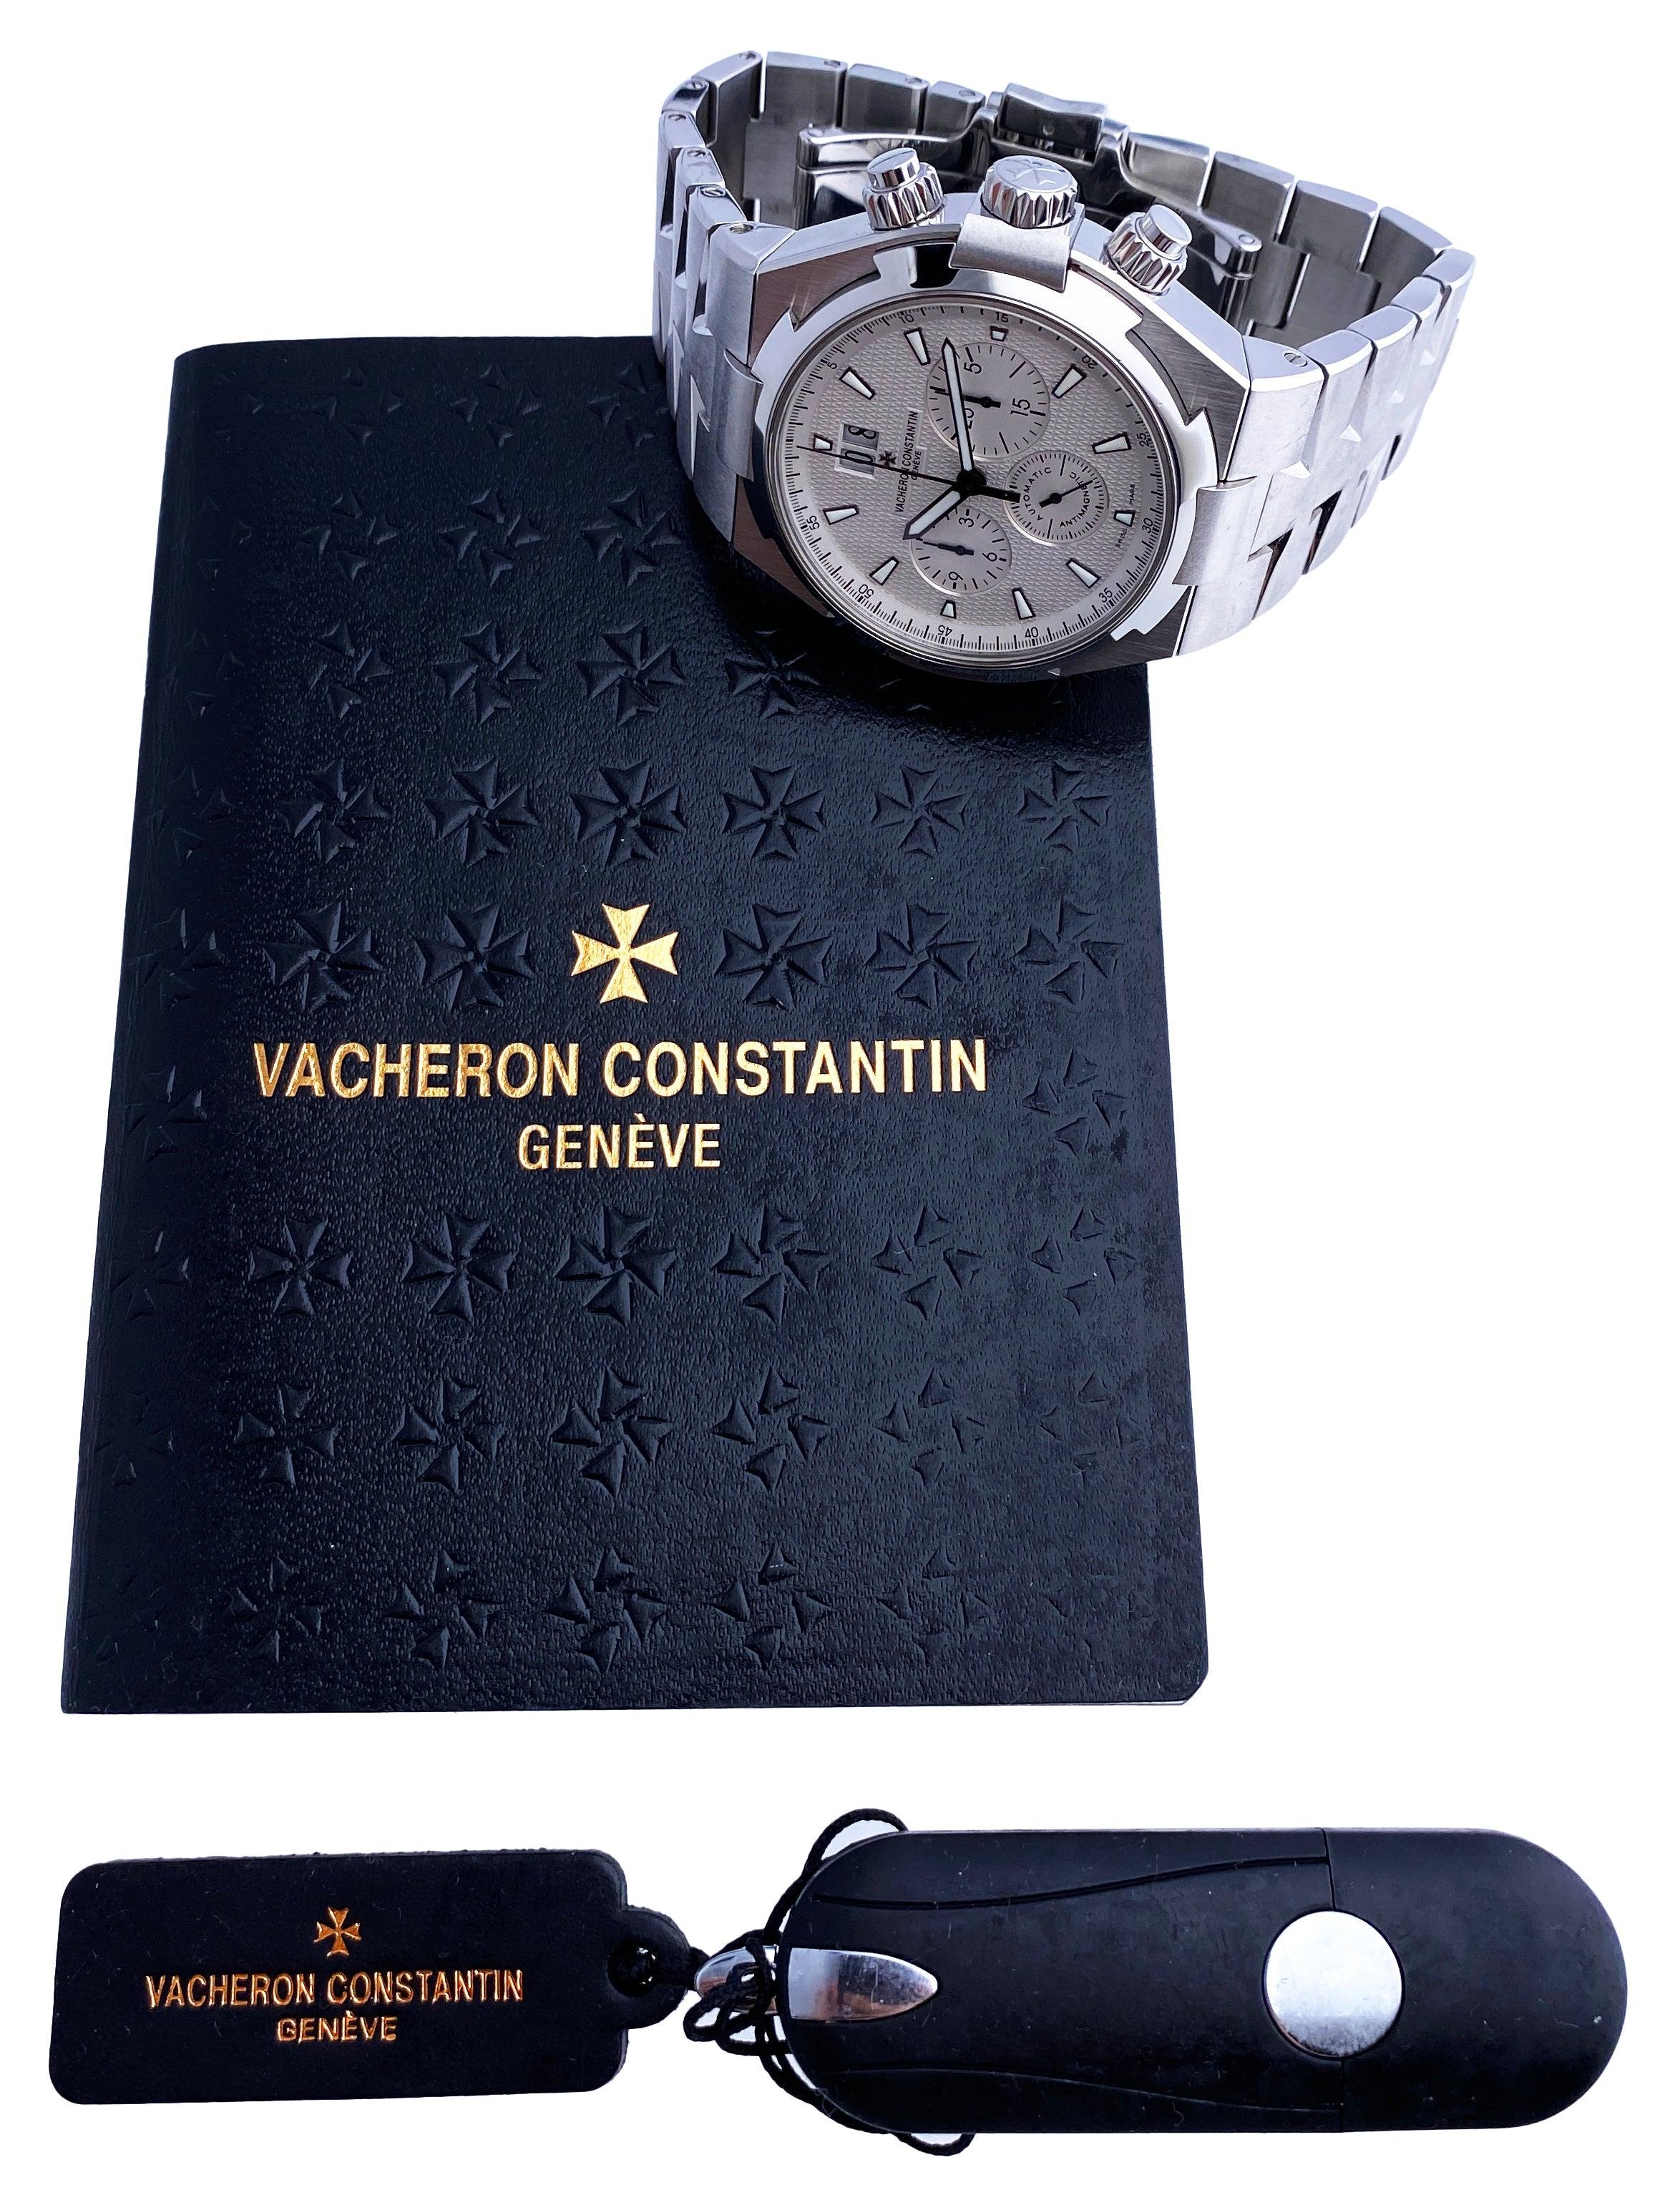 Vacheron Constantin Overseas 49150/B01A-9095 Mens Watch. 42mm stainless steel case with stainless steel fixed bezel. White dial with luminous steel hands and index hour marker. Three sub-dial: 30-minute counter at 3 o'clock, seconds sub-dial at 6